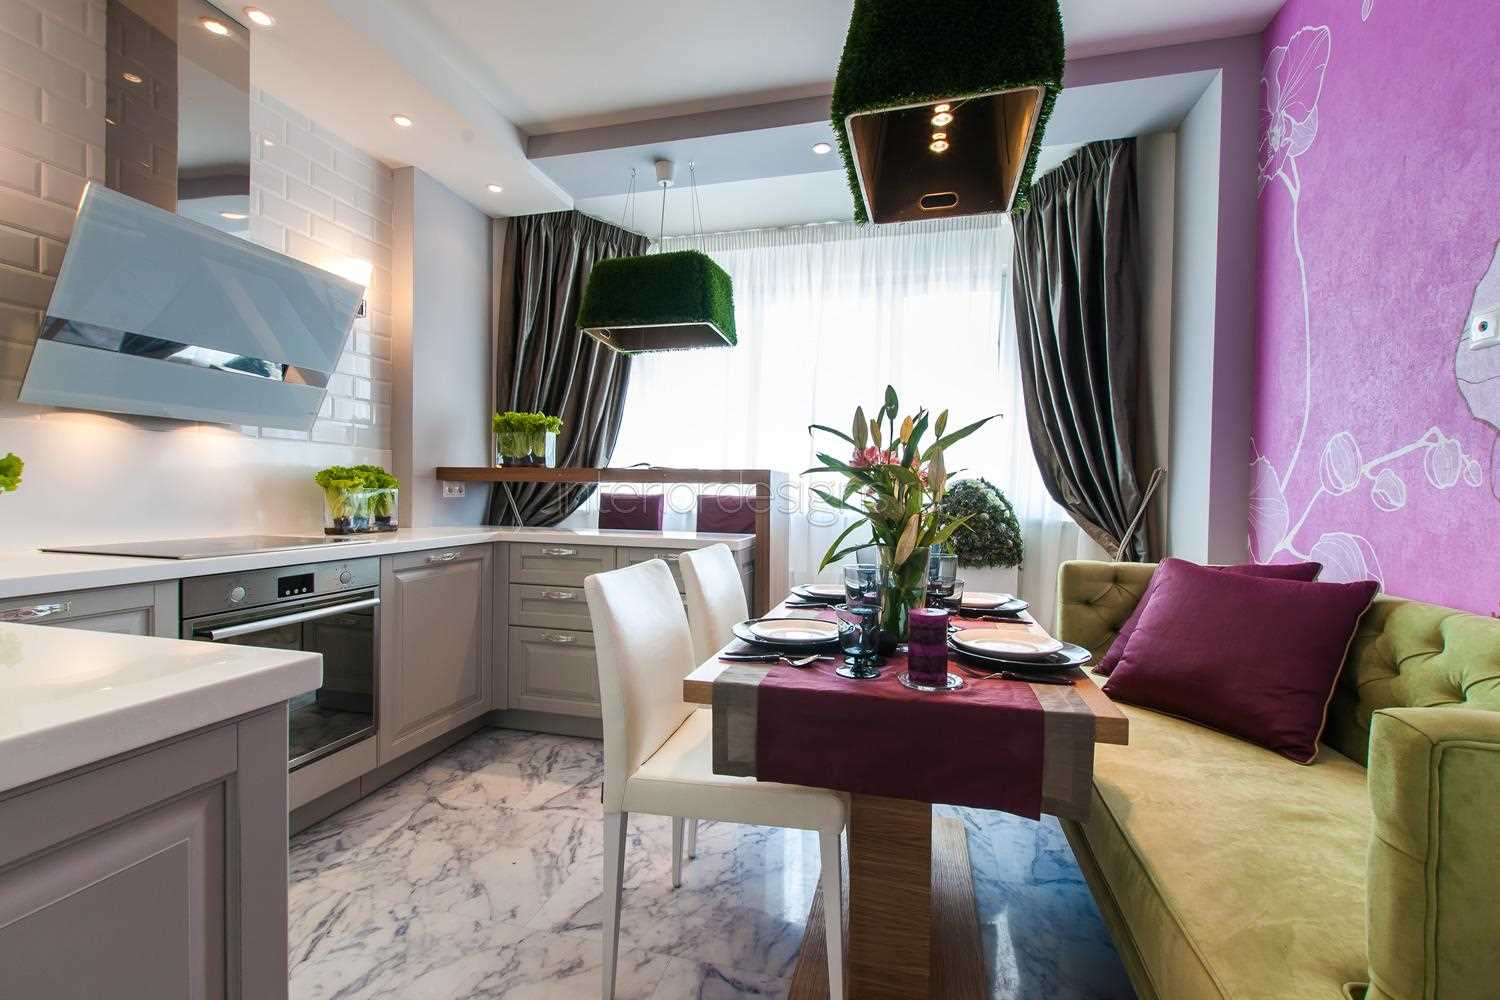 An example of a bright kitchen design 14 sq.m